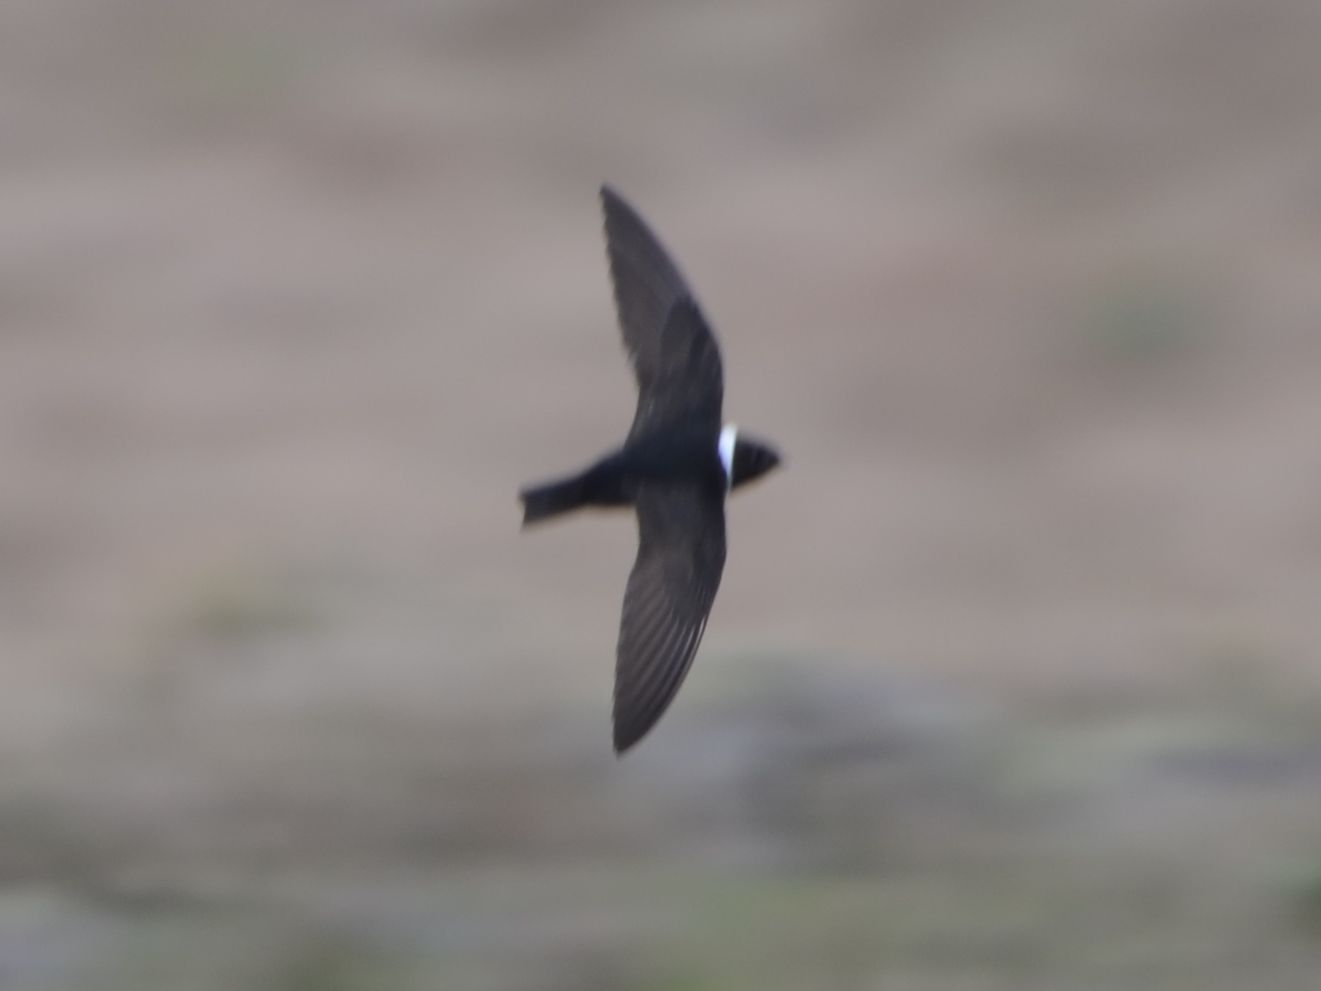 Click picture to see more White-collared Swifts.